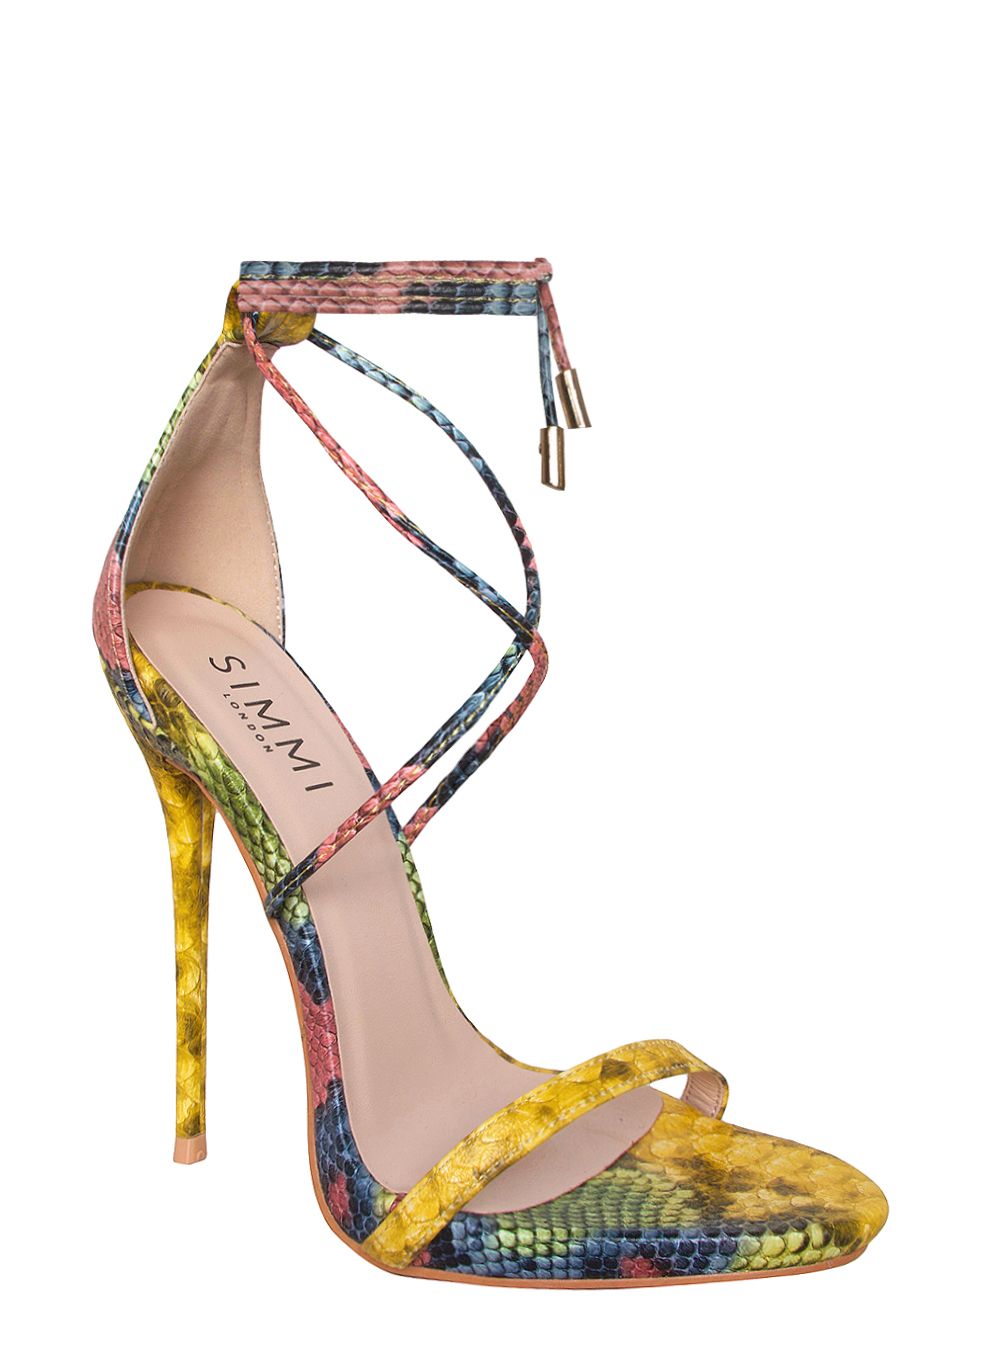 Shania Yellow Snake Lace Up Stiletto Heels